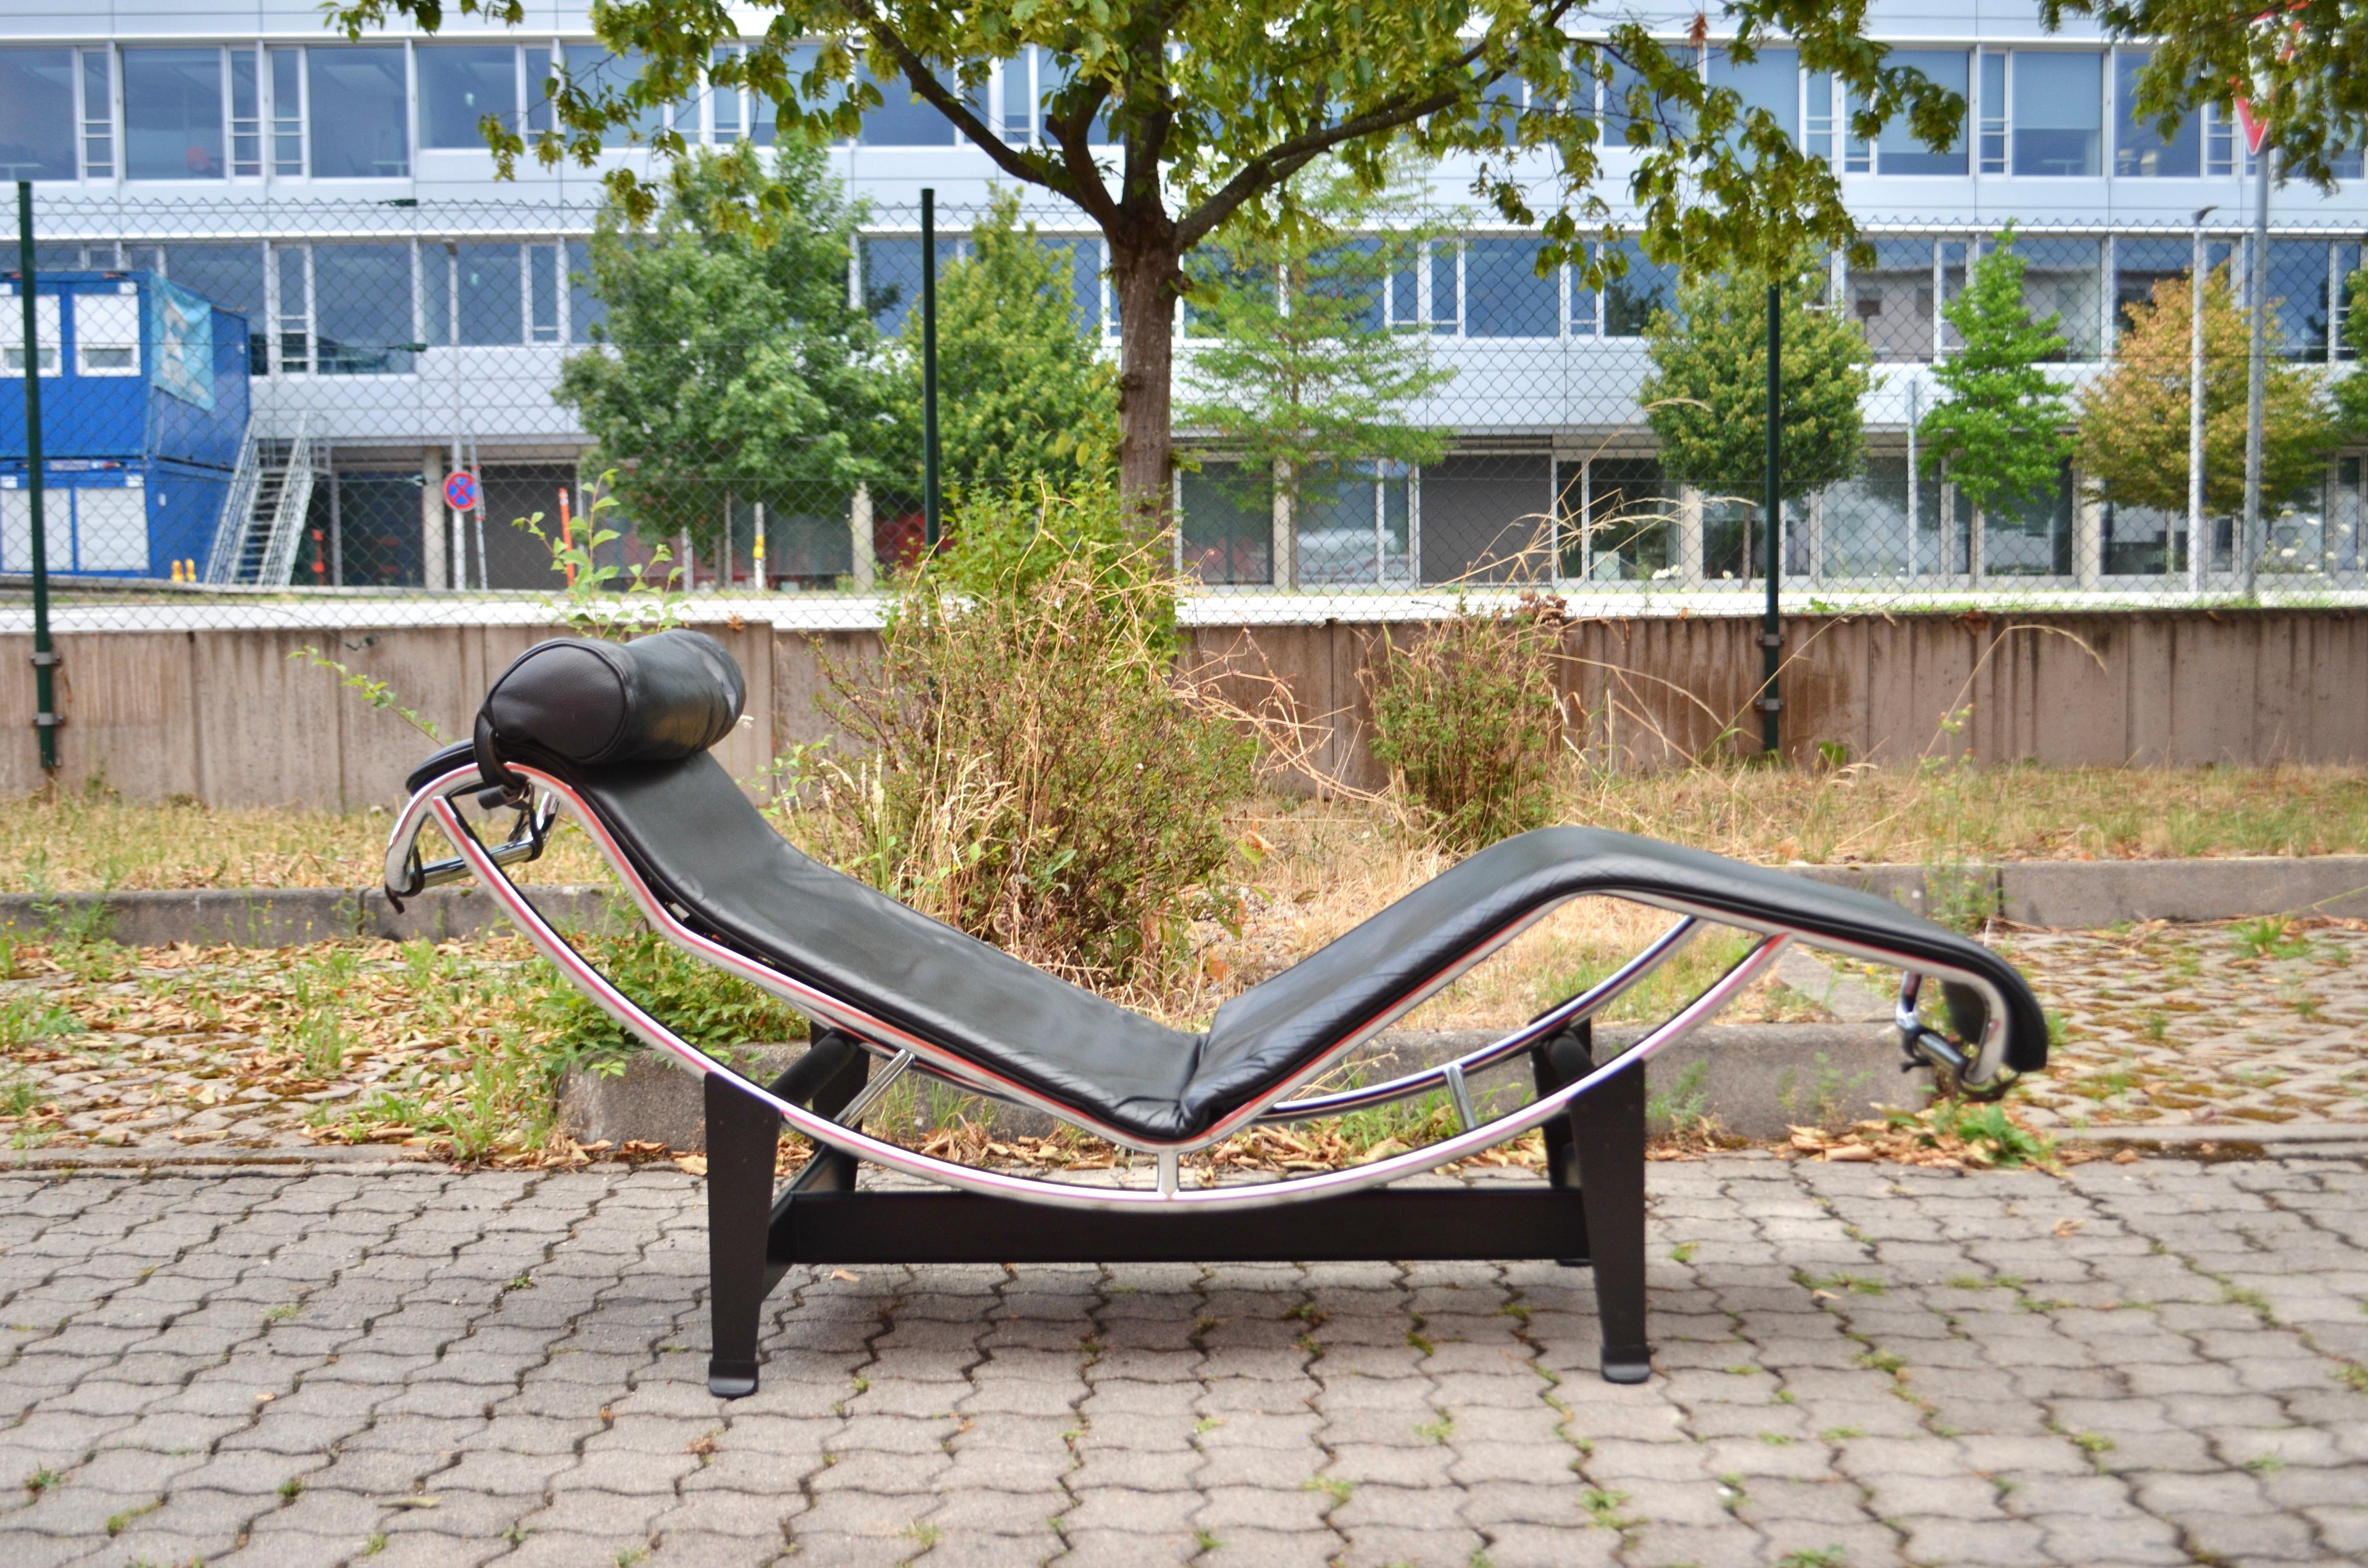 This LC4 chaise longue in black leather was designed by Le Corbusier/ Pierre Jeanneret/ Charlotte Perriand and produced by Cassina.
It features the classic chrome steel frame and a black industrial base.
The leather is in good condition.
The seat is